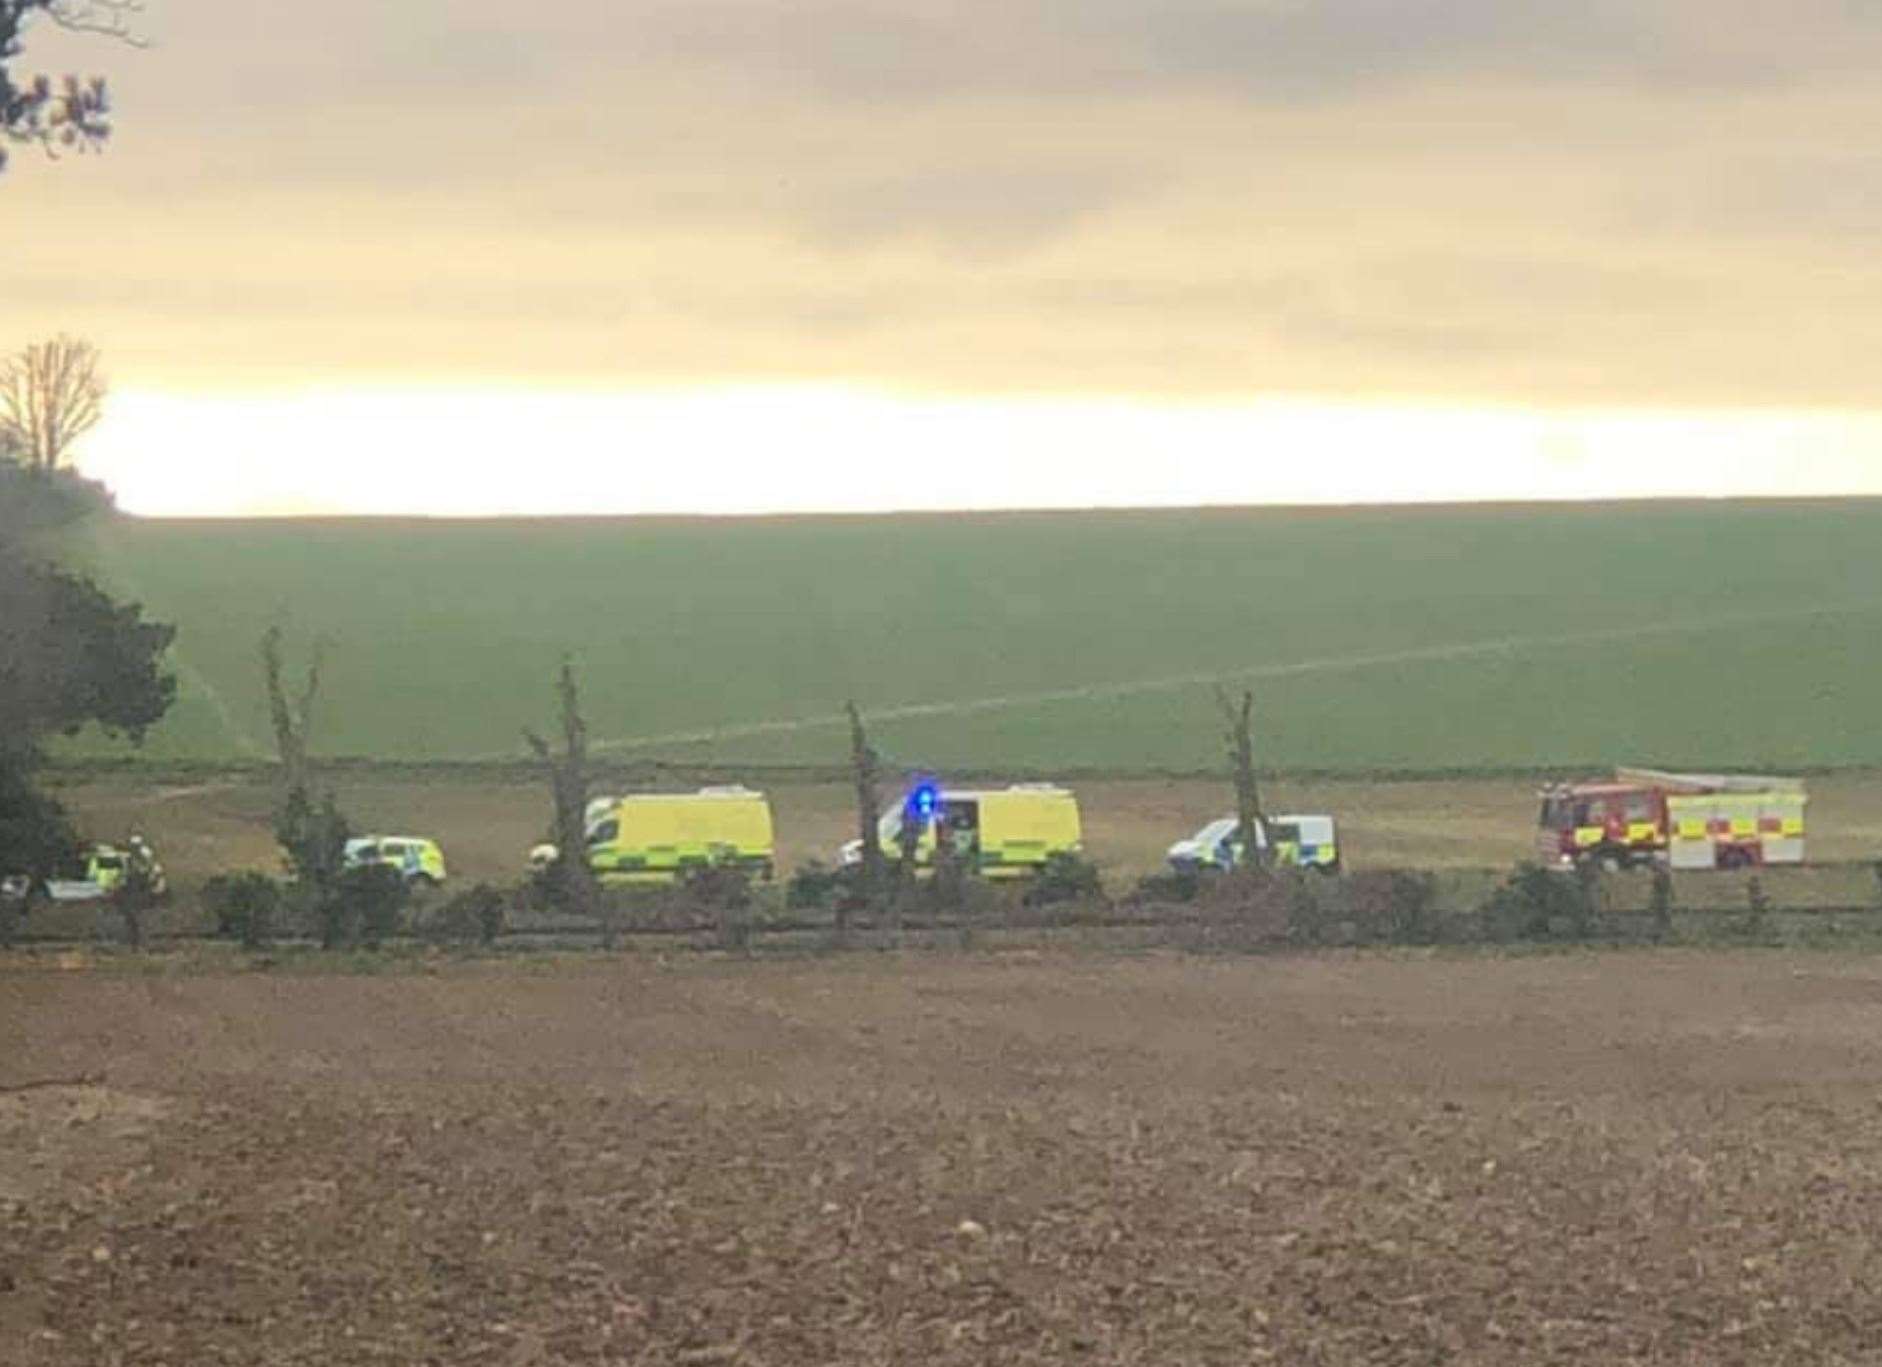 Emergency services pictured in the Coldblow Woods area of Deal